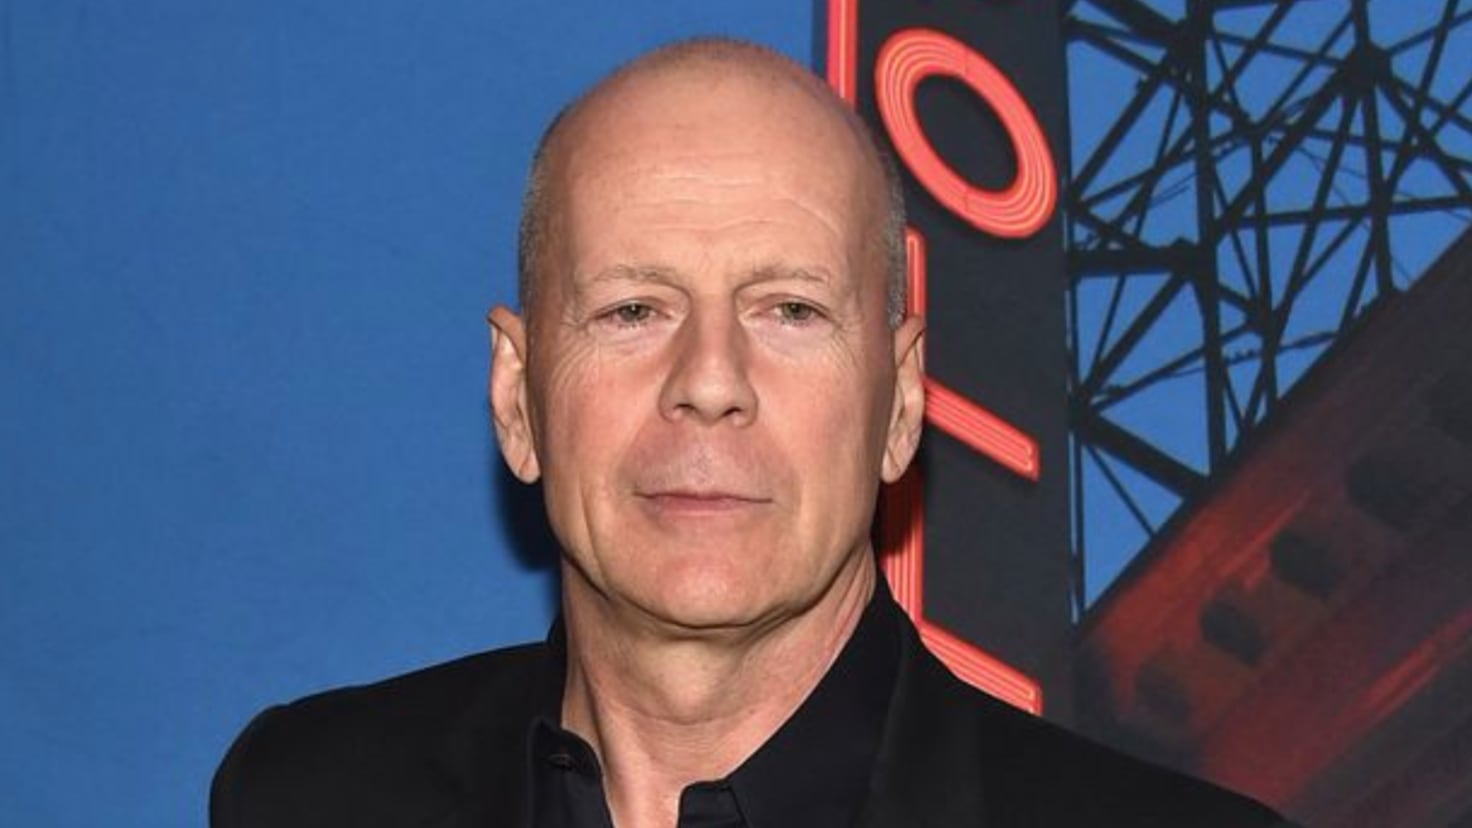 Bruce Willis's health seriously deteriorates: No one knows how much time he has left
